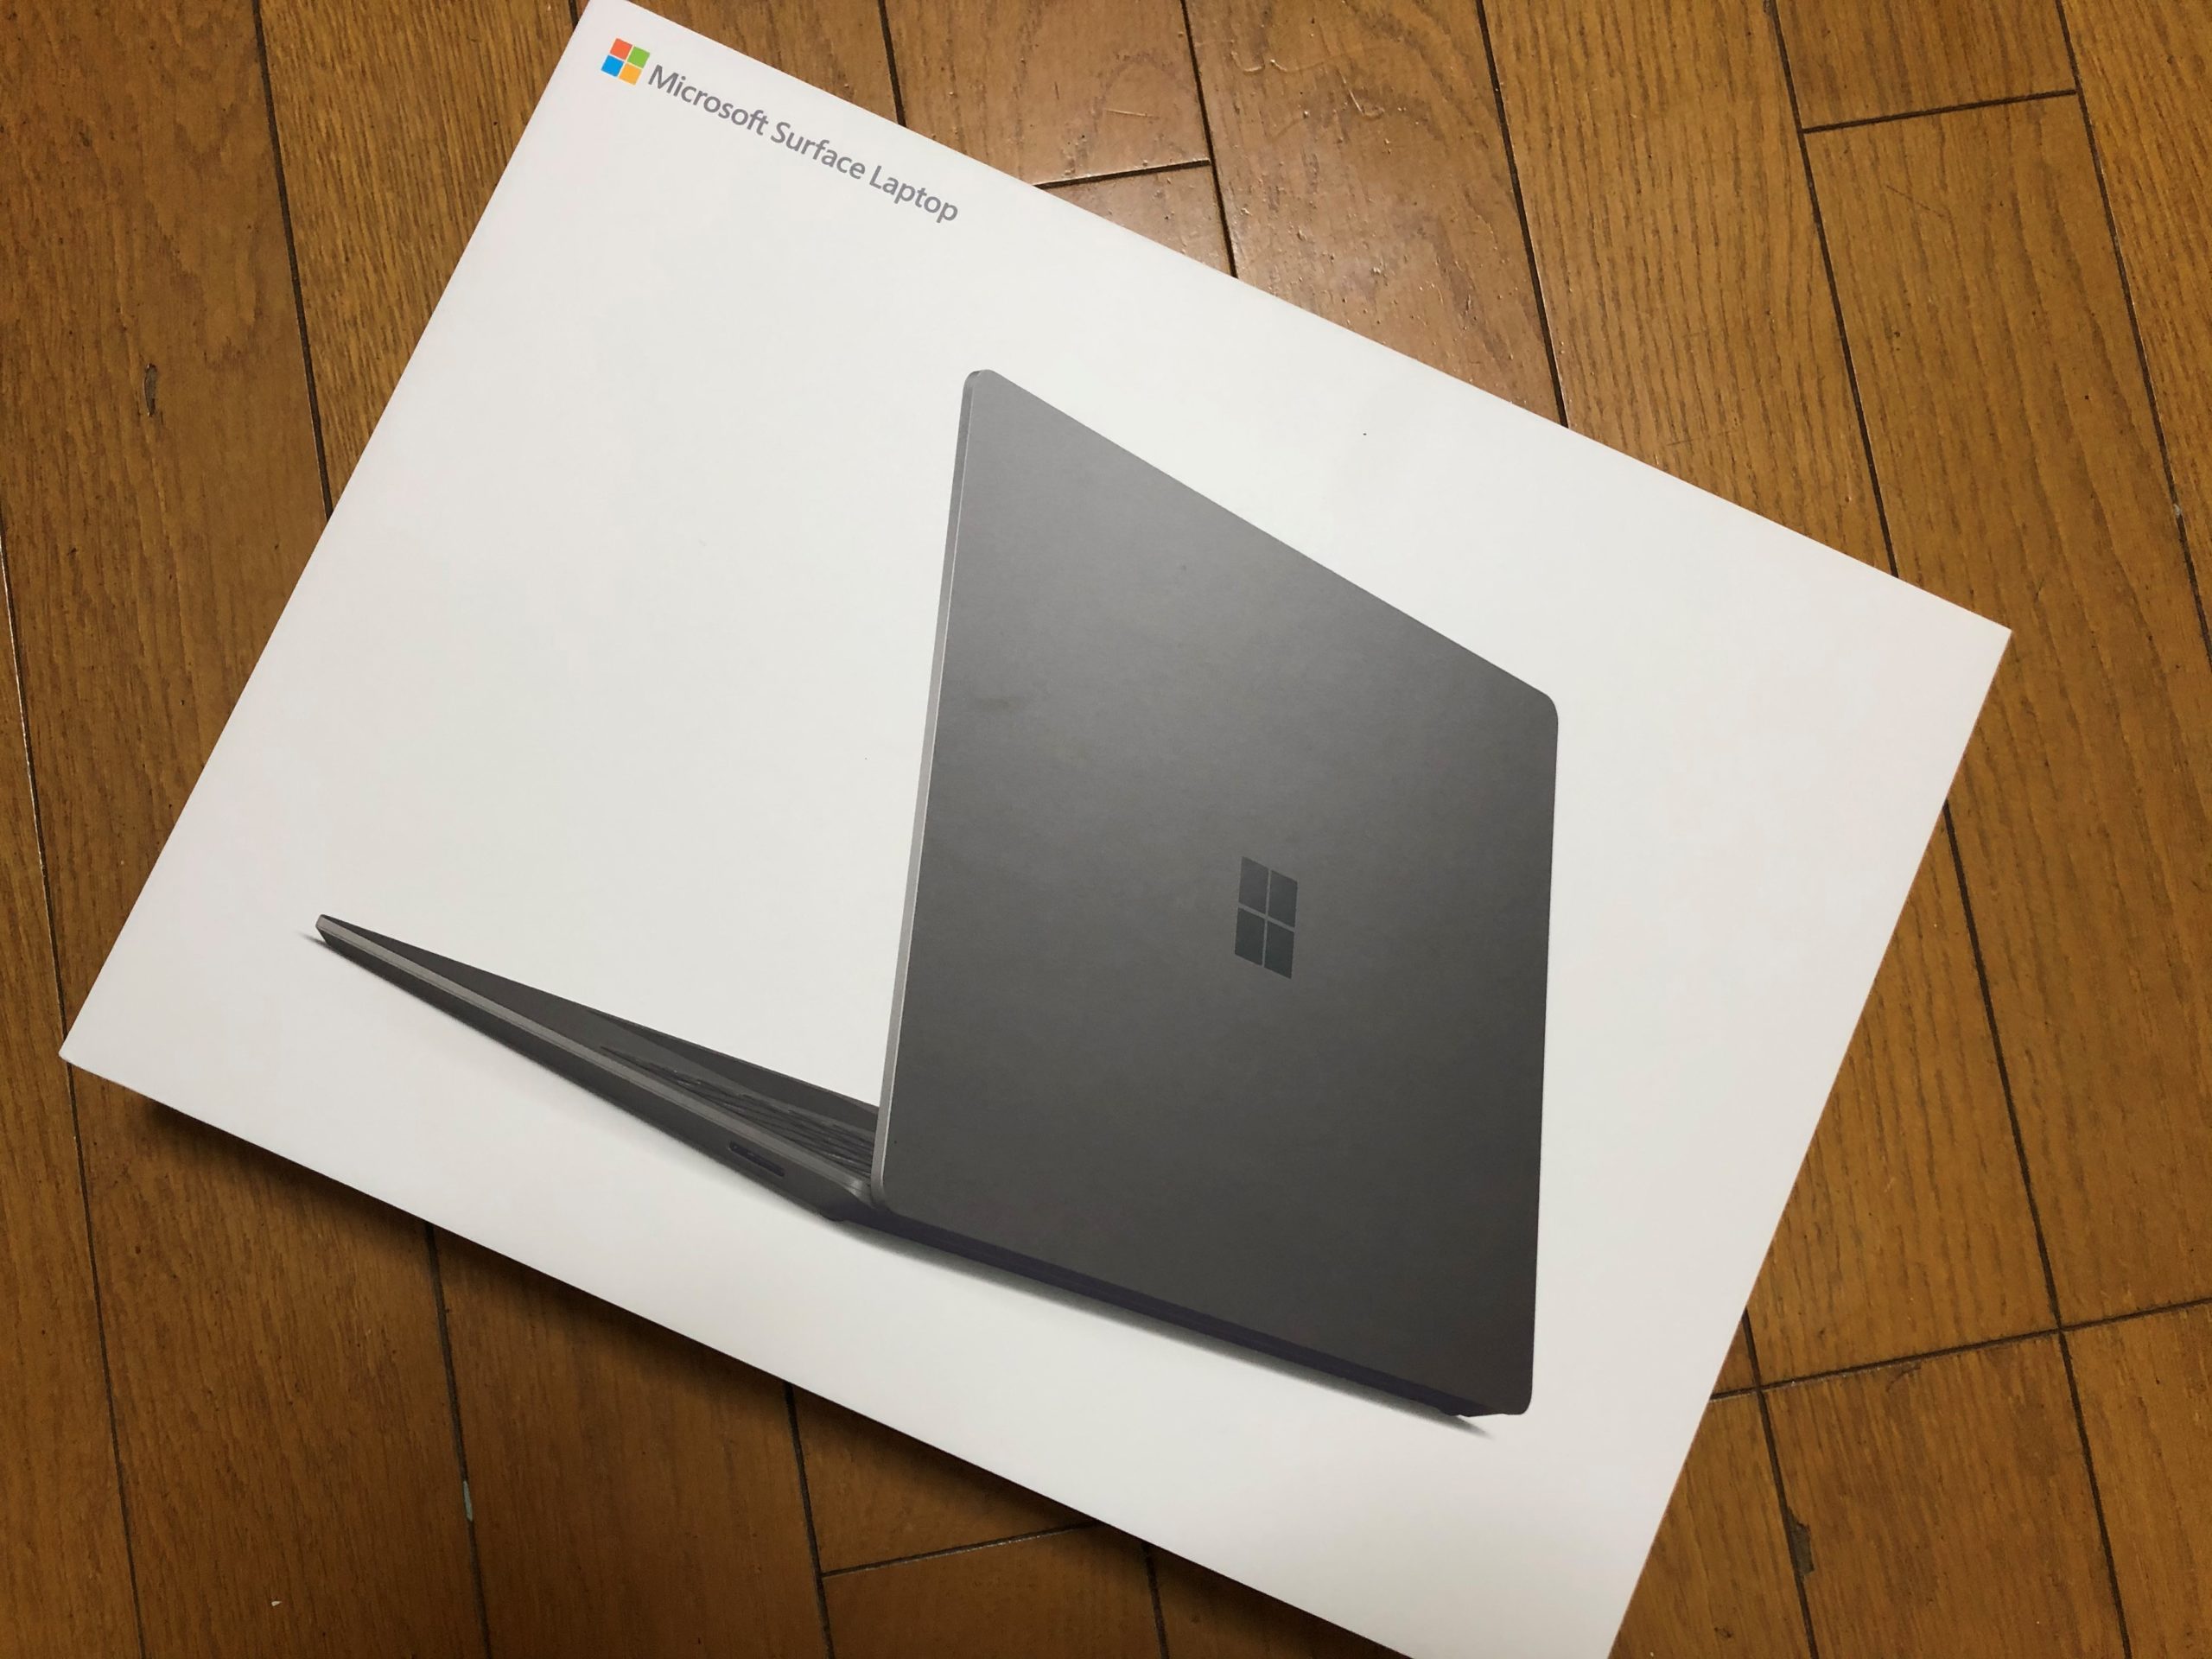 CPUIntelCoSurface Laptop 3 13.5インチ VPT-00032